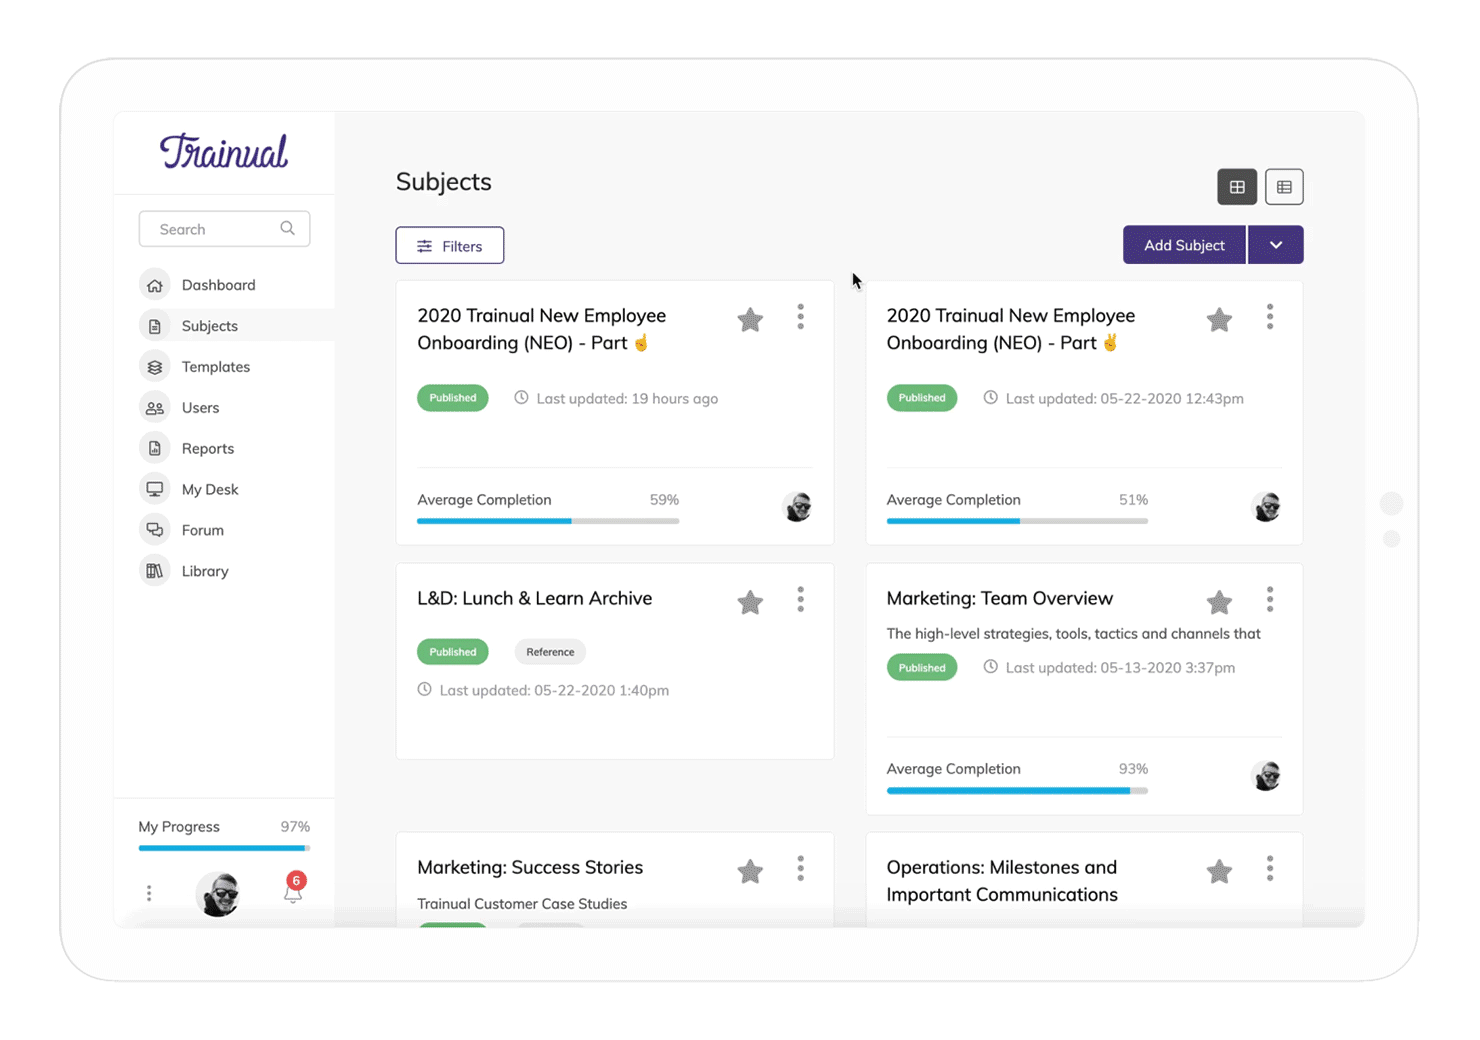 Trainual's HR learning management system dashboard